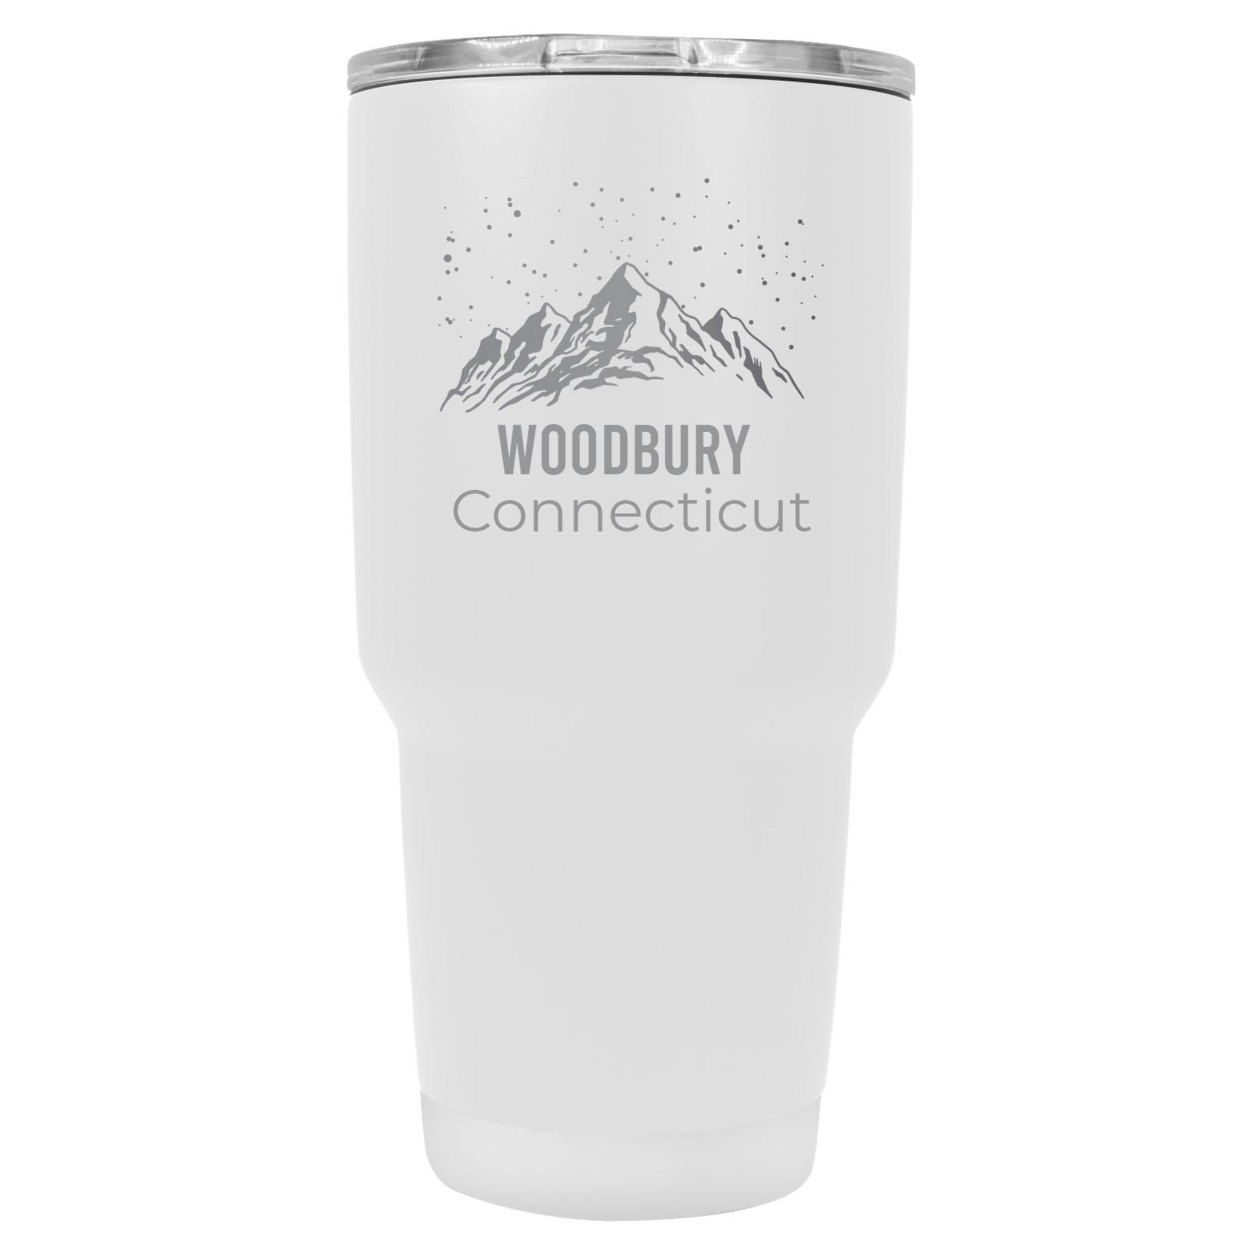 Woodbury Connecticut Ski Snowboard Winter Souvenir Laser Engraved 24 Oz Insulated Stainless Steel Tumbler - Rose Gold